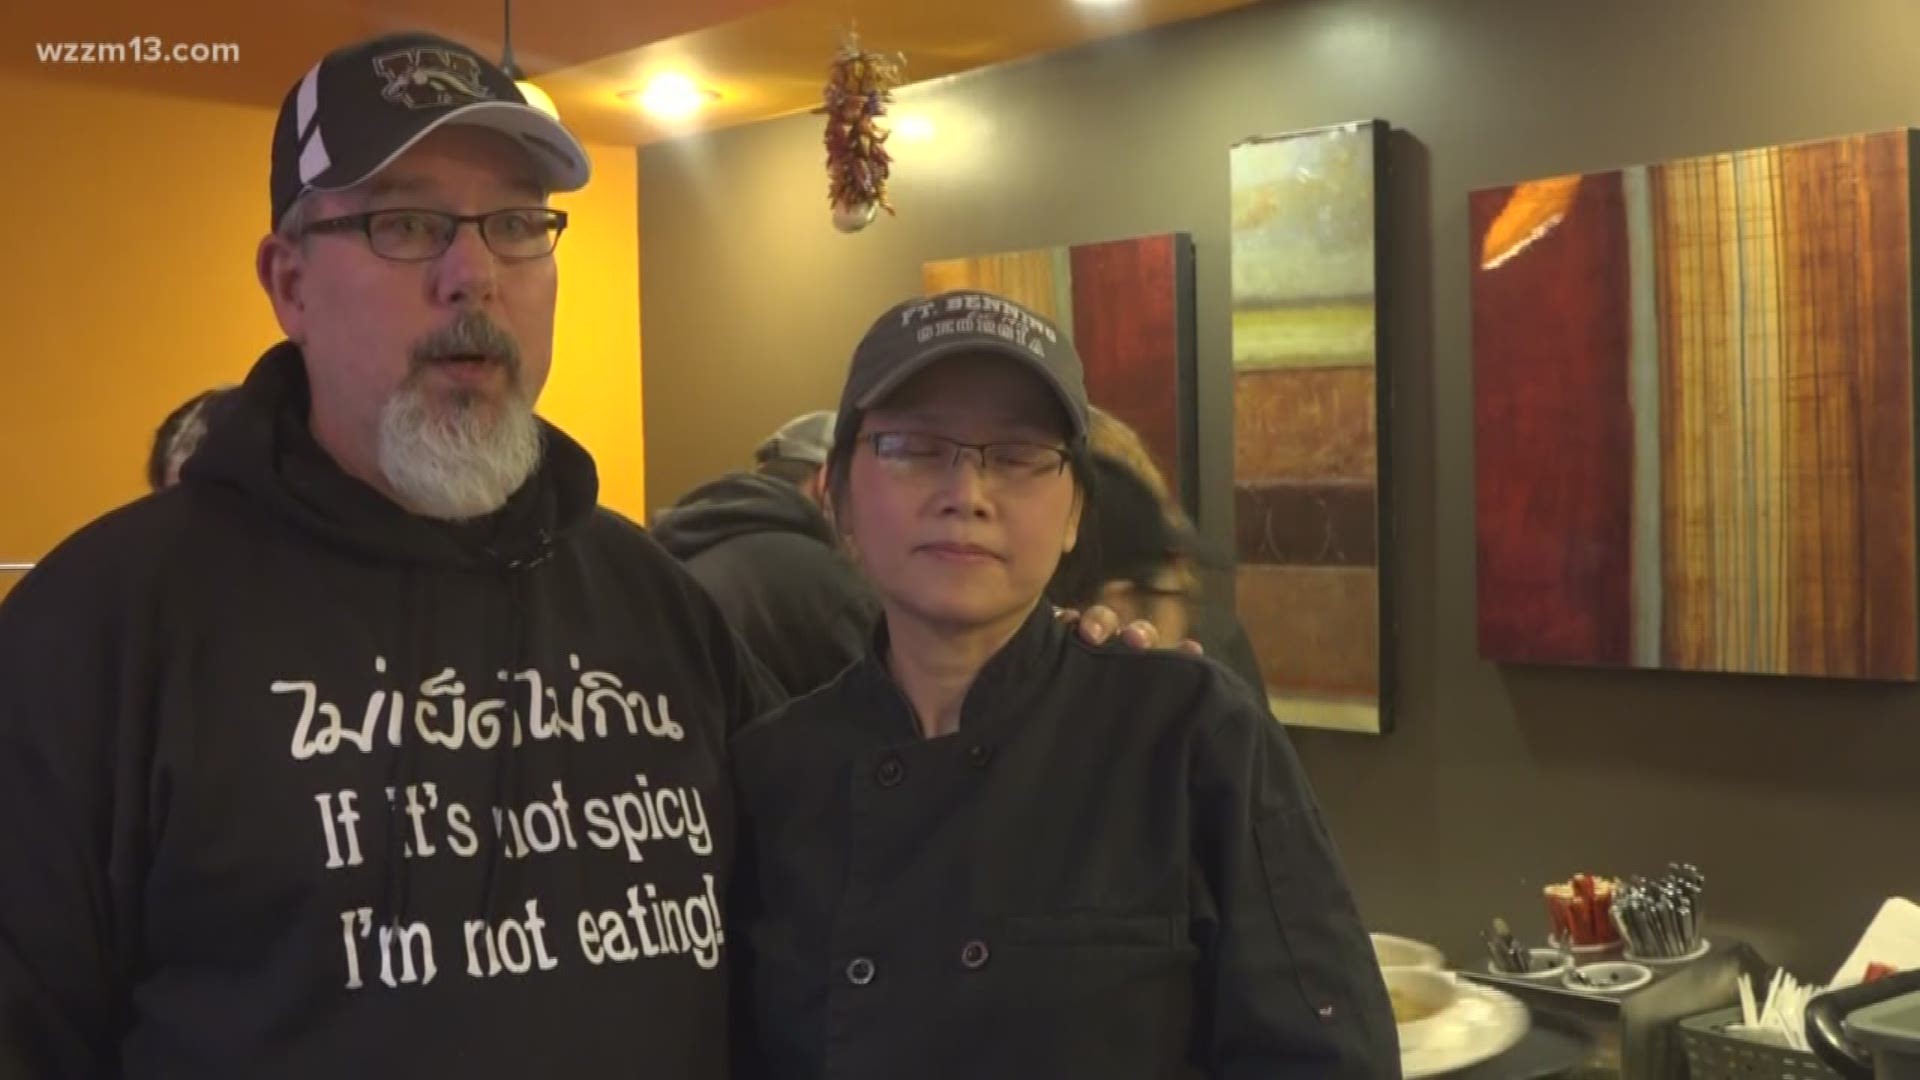 The owners of Lai Thai Kitchen on Leonard Street in Grand Rapids started this Christmas Day tradition around four years ago when the restaurant opened.